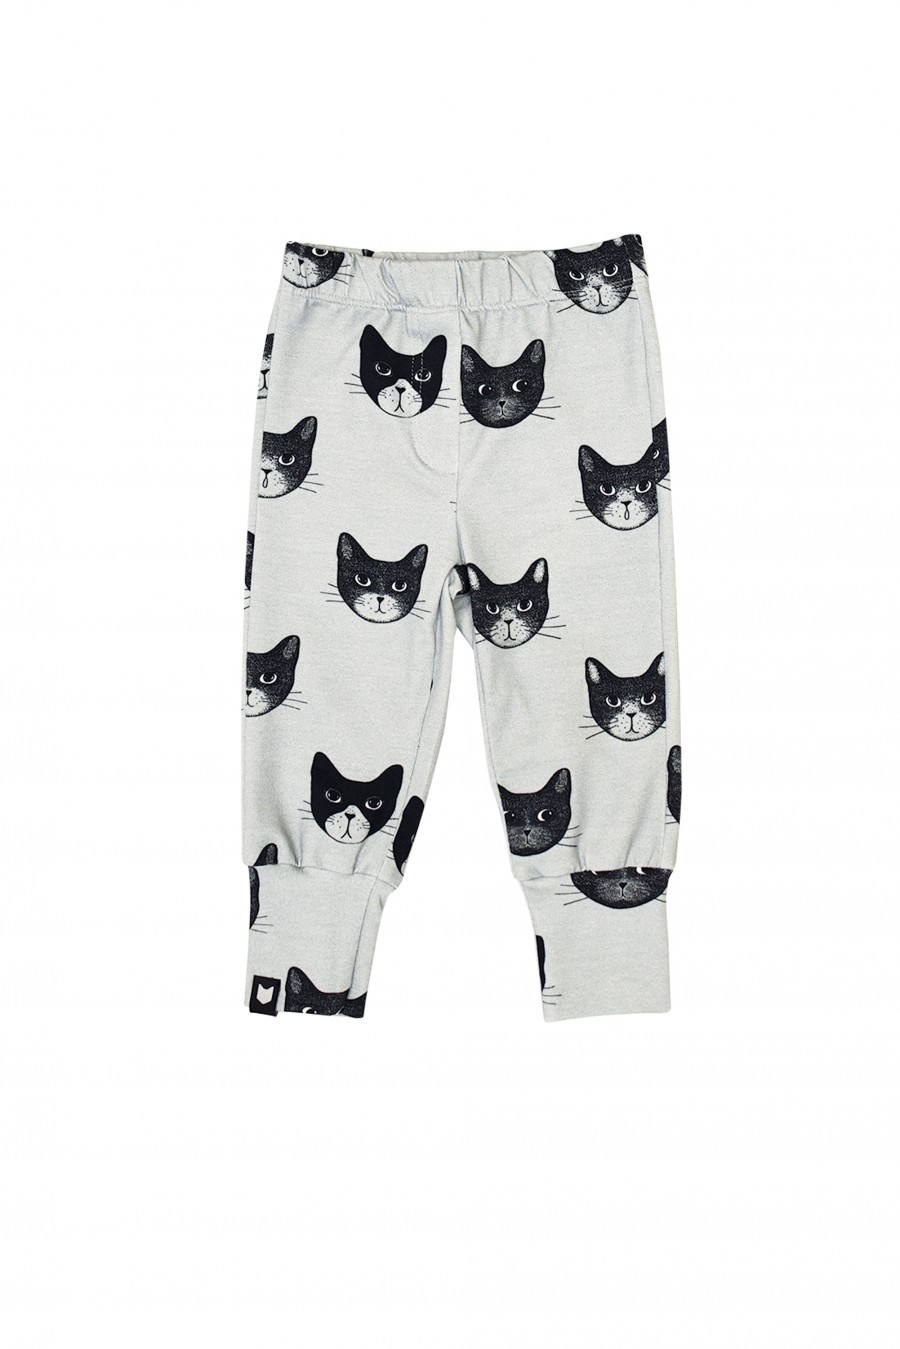 Grey pants with cats FW18082